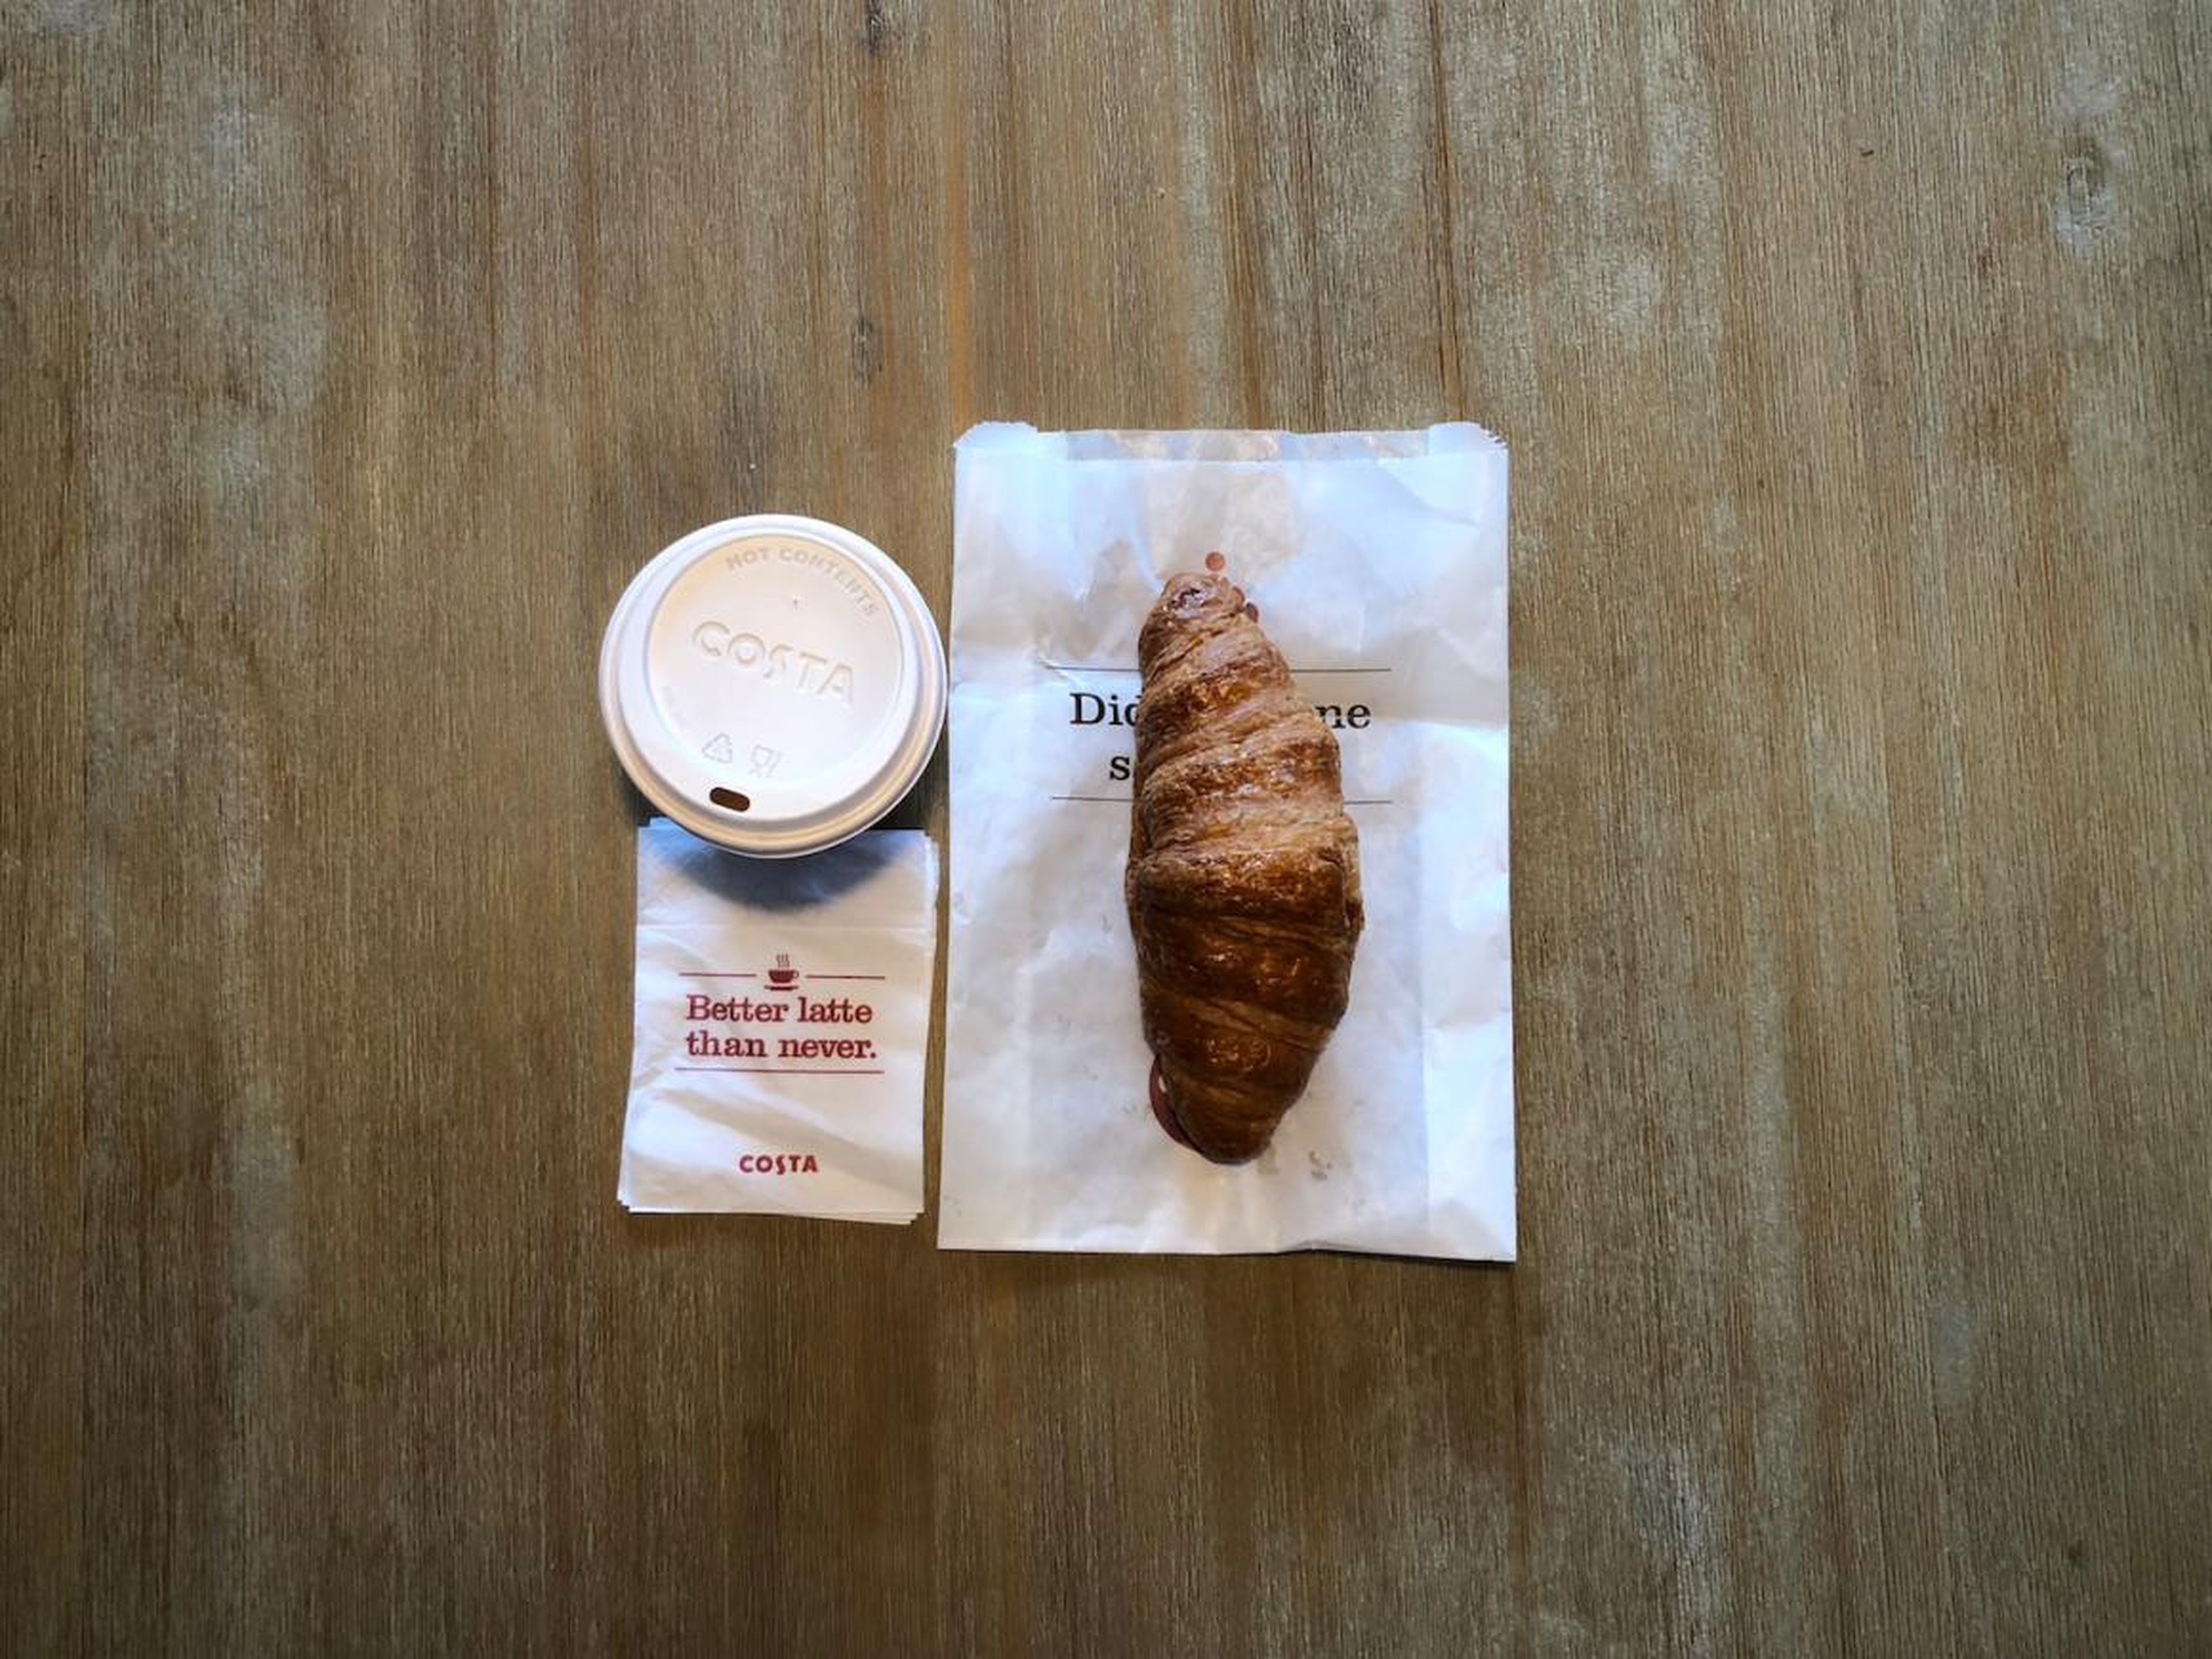 I ordered a flat white and a croissant, which came to £3.70 ($4.80).